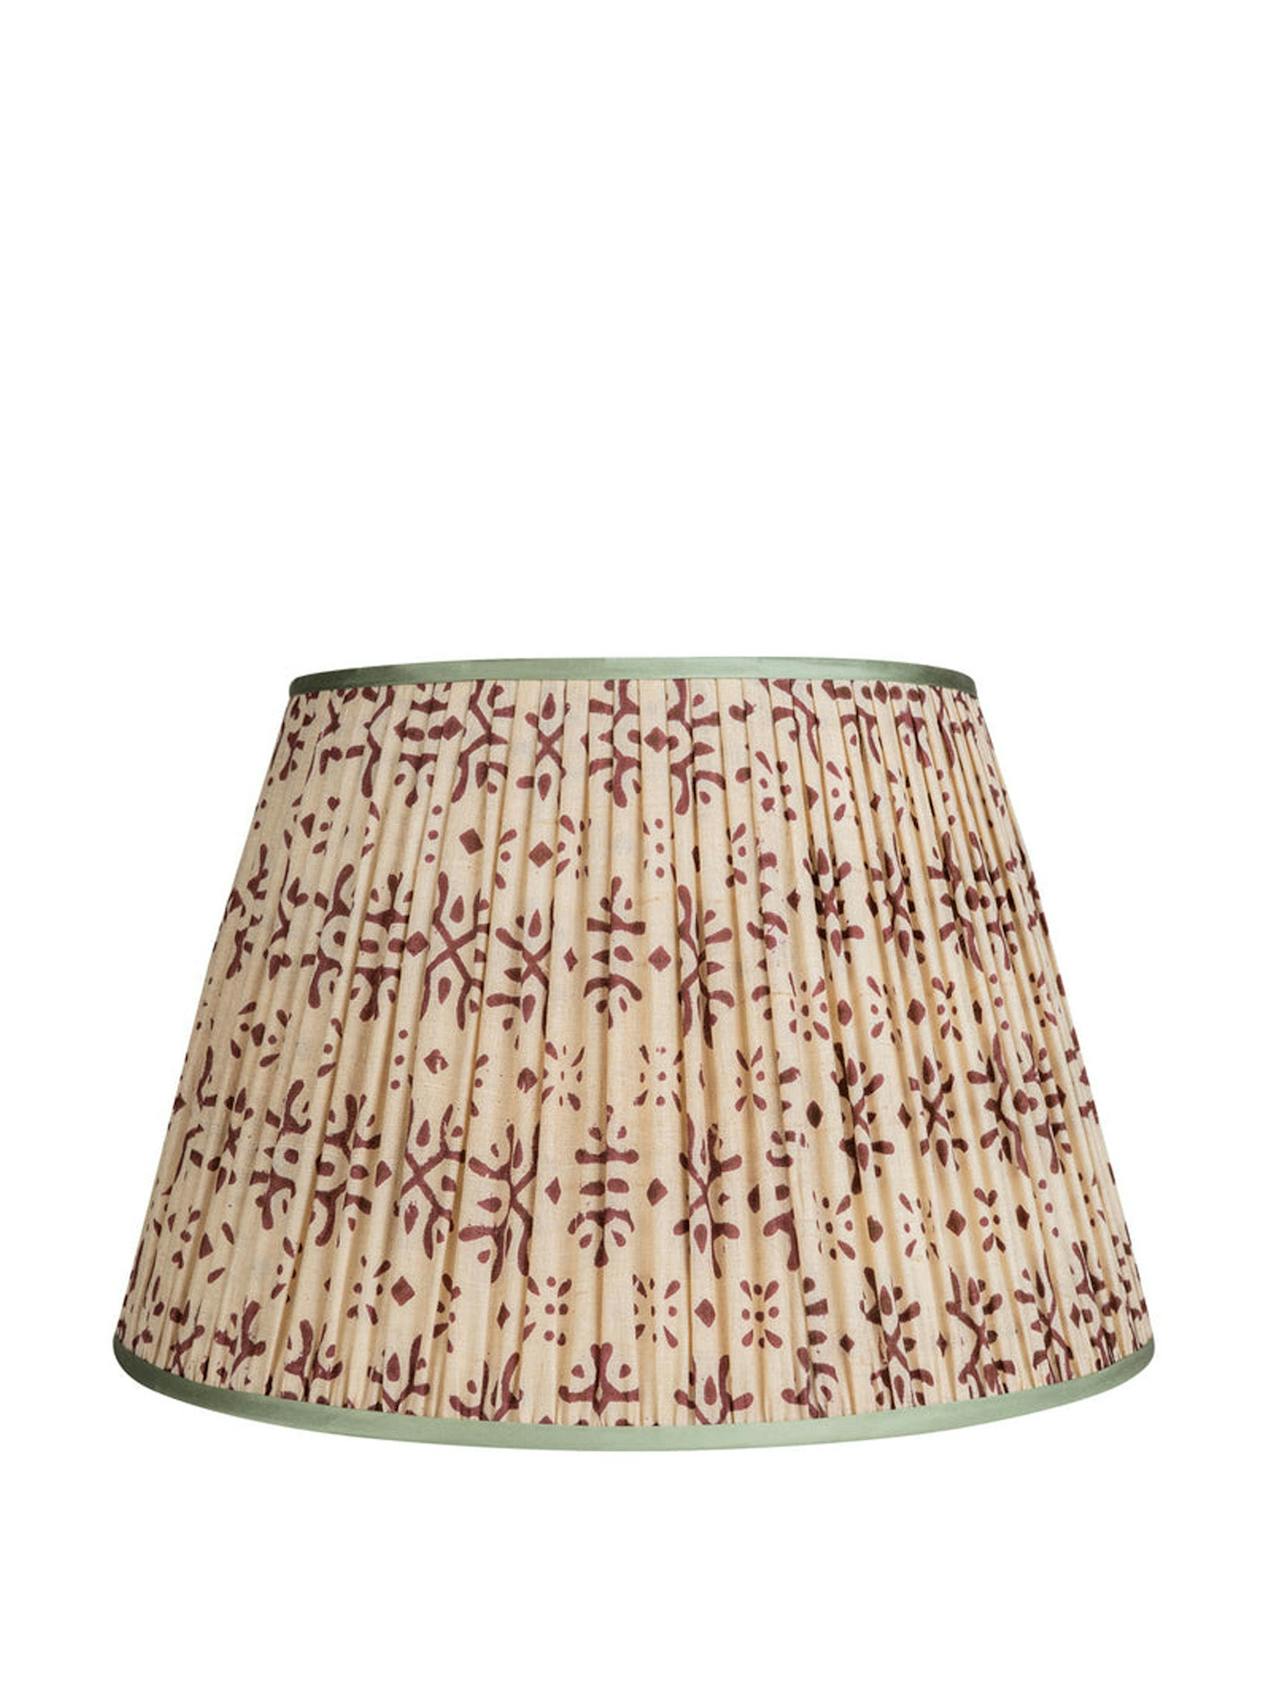 Plum on cream pleated silk lampshade with mint trim